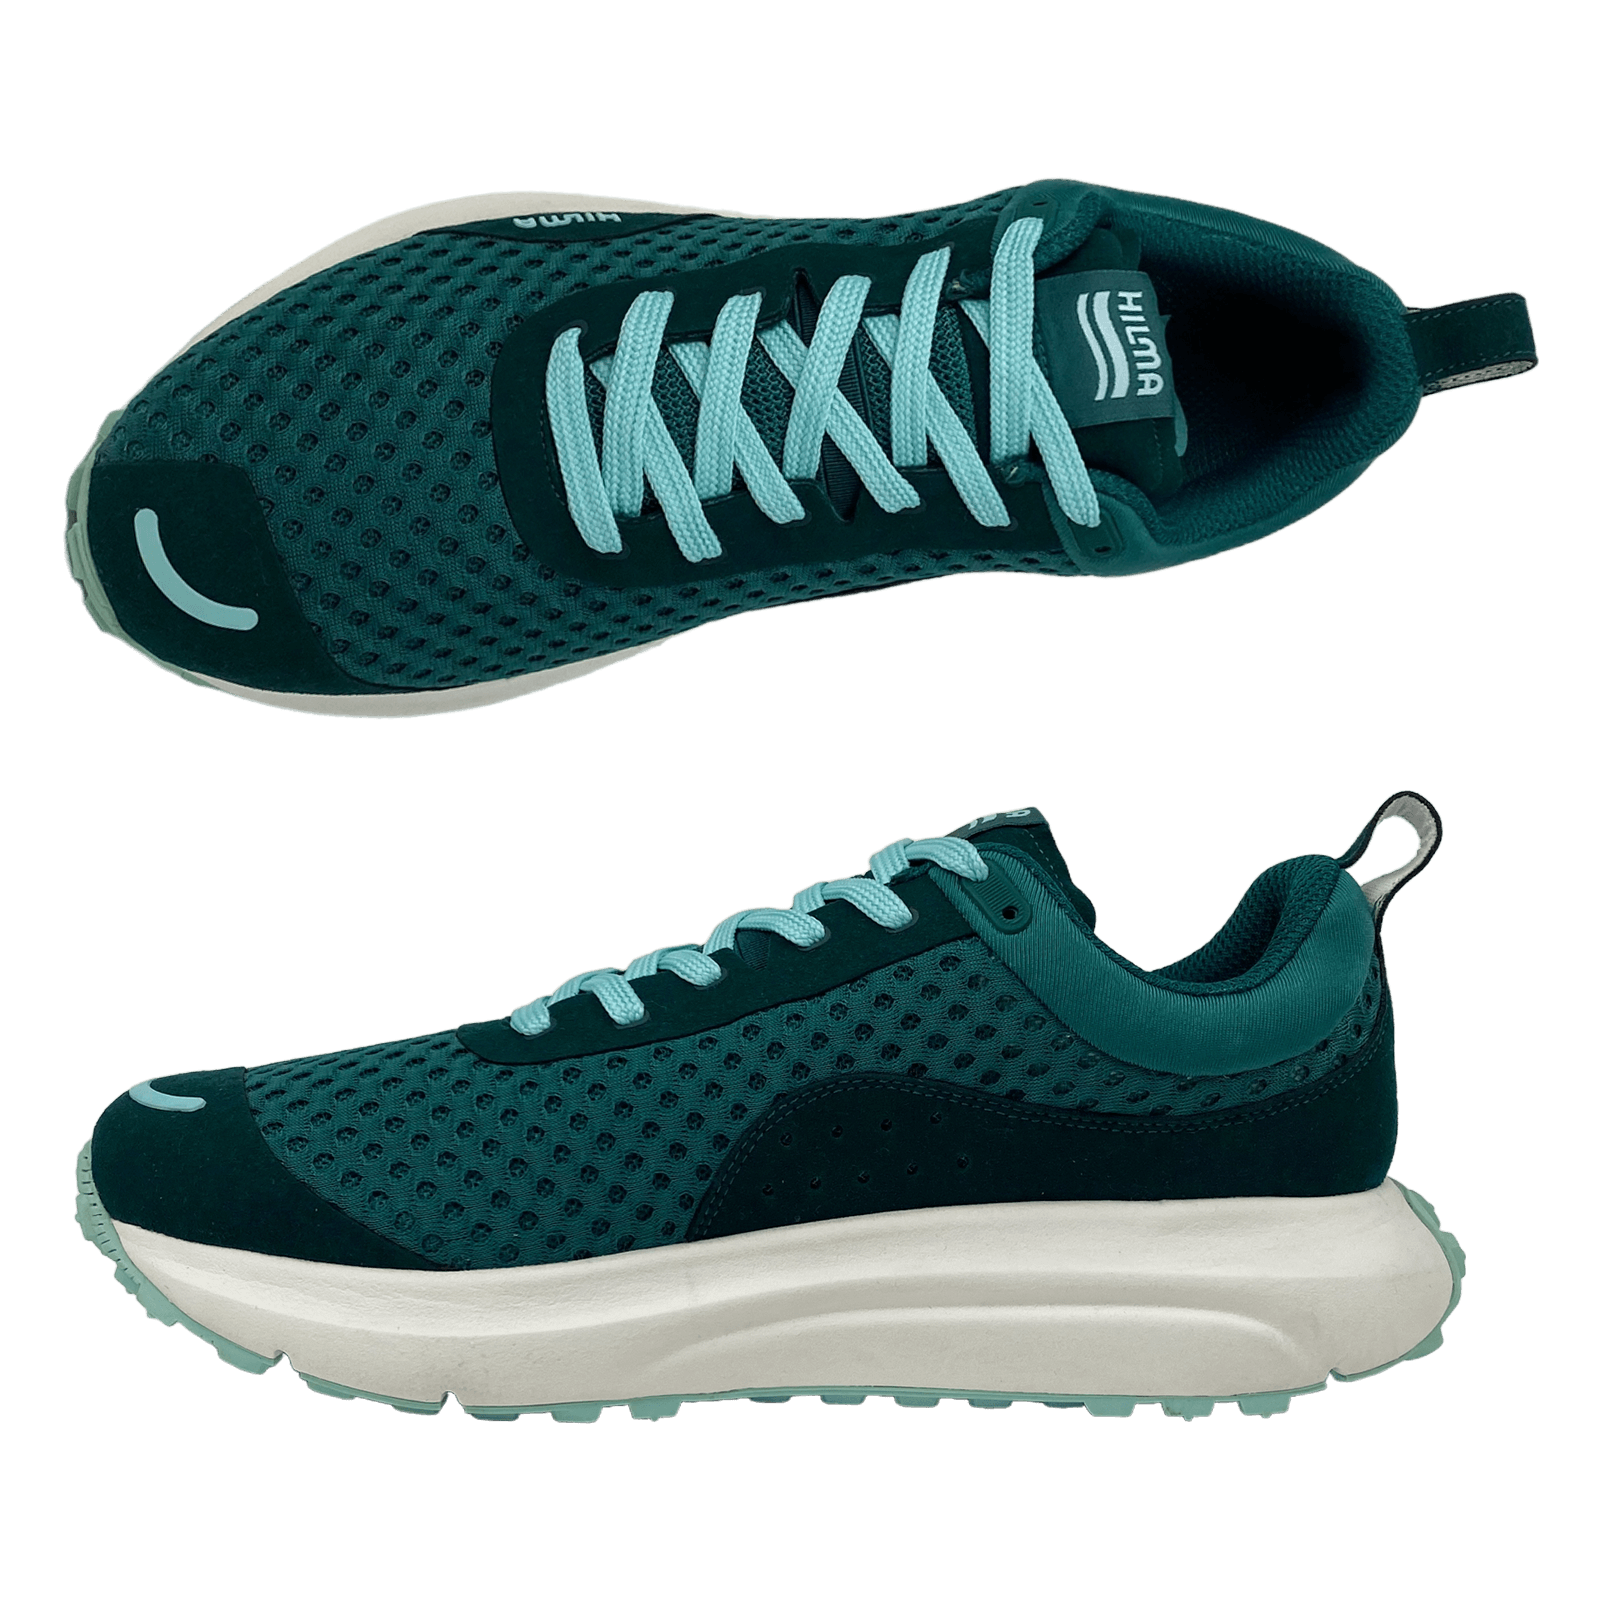 Top and Side Angle view of the Hilma Running Shoe in Evergreen